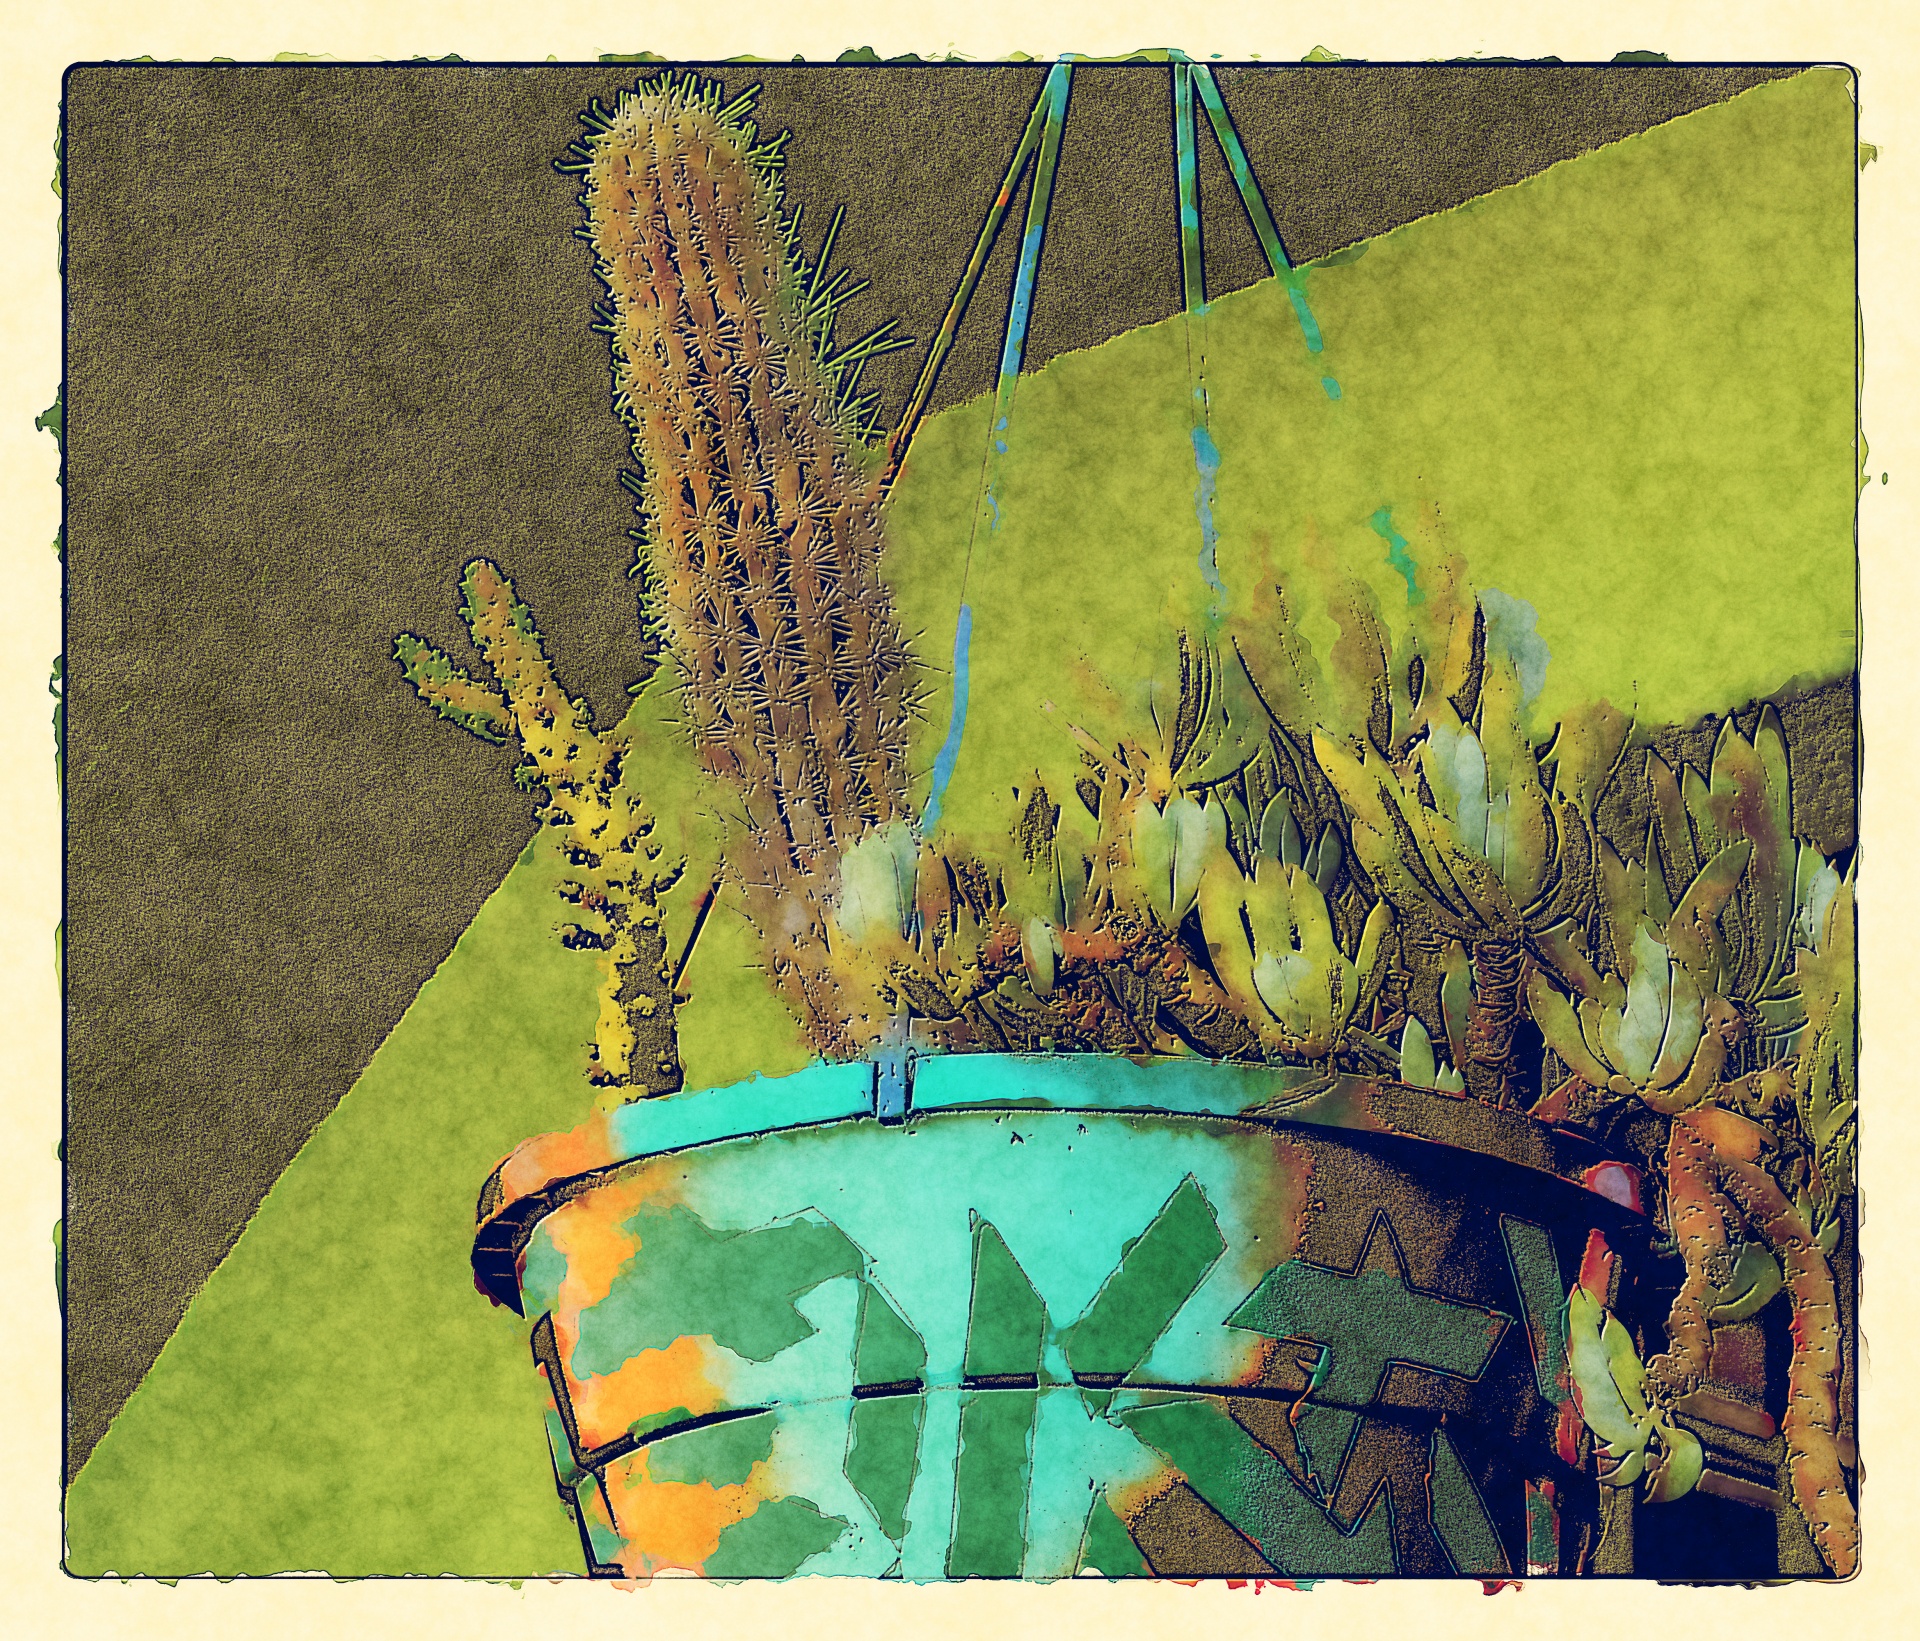 artistic rendering of a desert style hanging planter